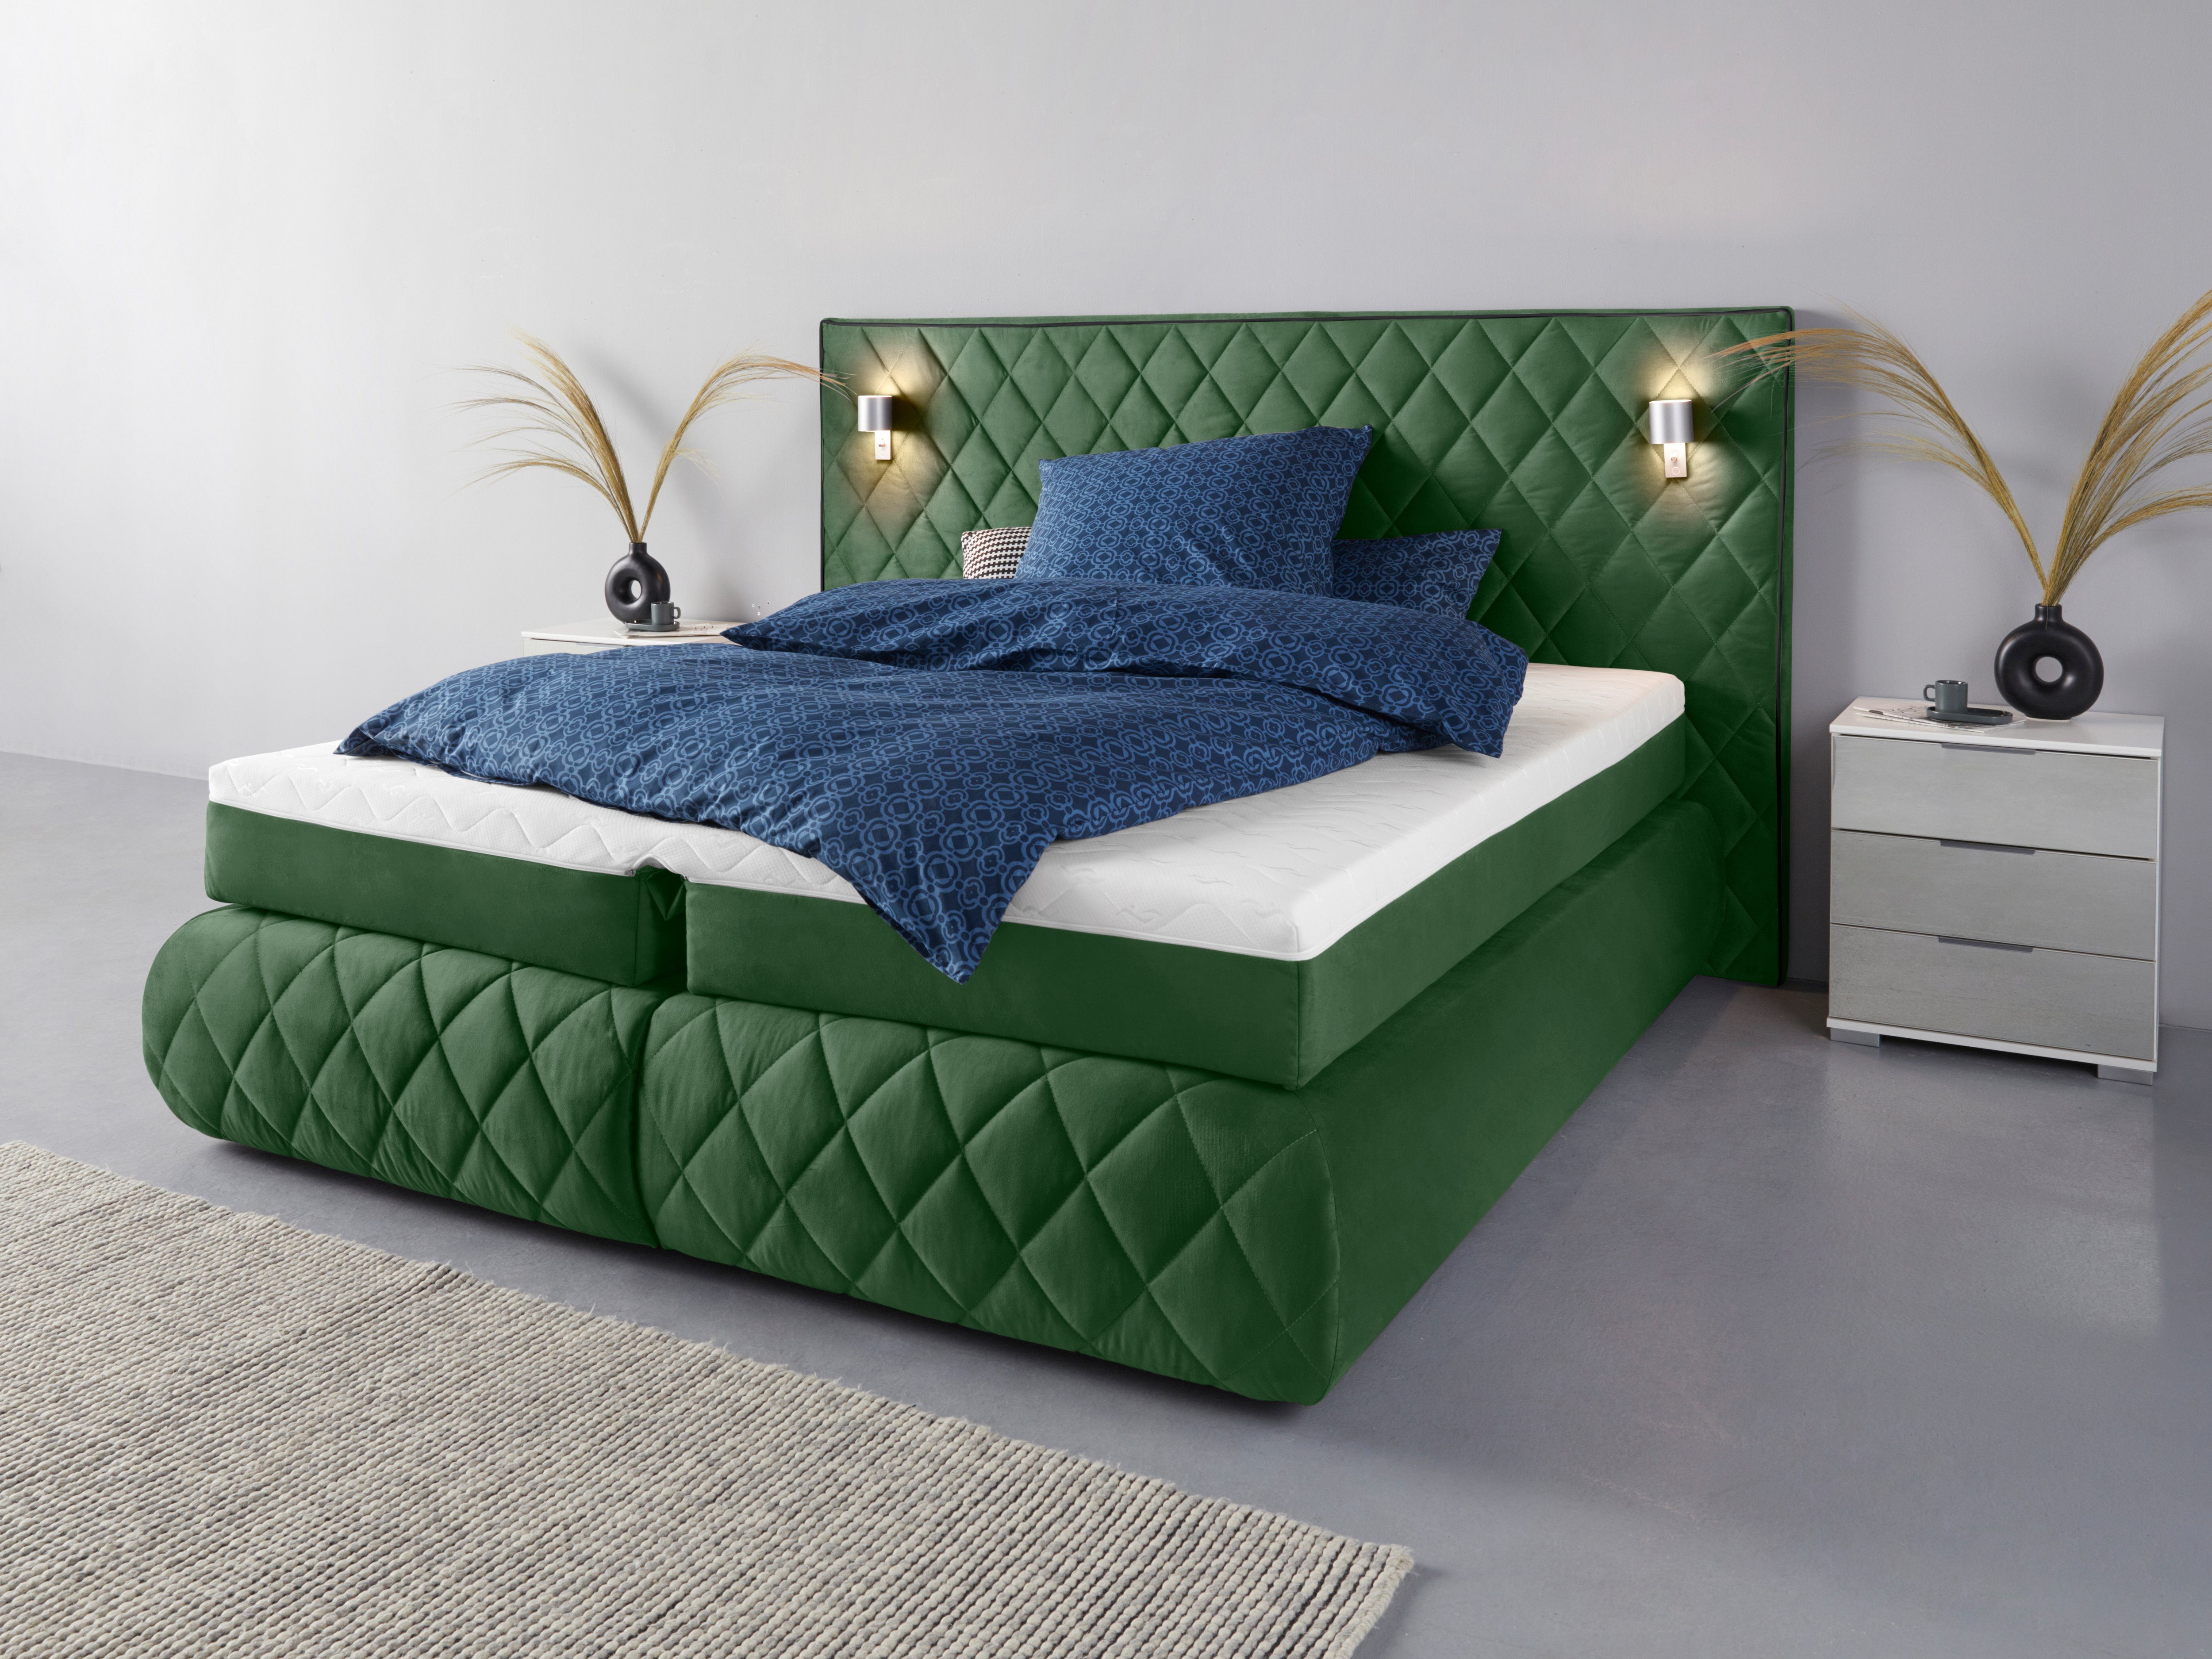 Places of Style Boxspring Alaric